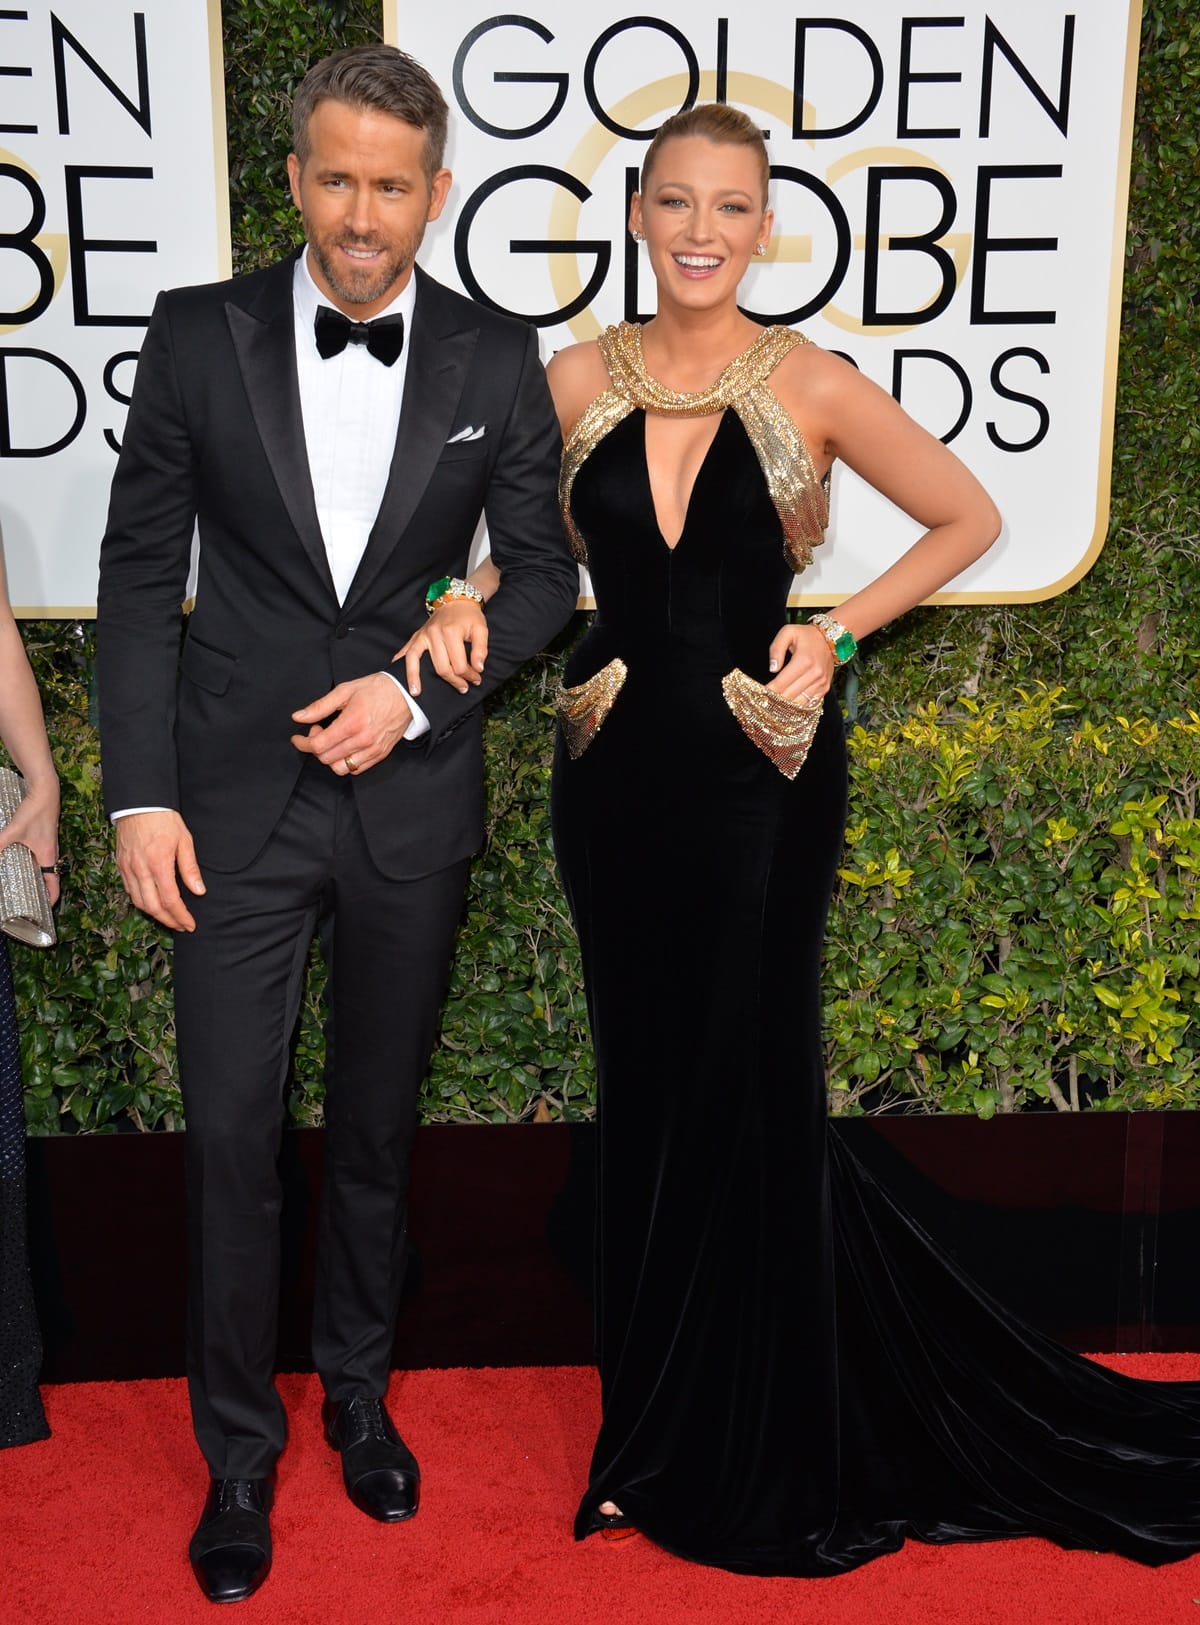 Blake Lively stands at 5ft 8 ½ inches (174 cm), while Ryan Reynolds is taller at 6ft 2 inches (188 cm), making a height difference of 5.5 inches (14 cm) between them